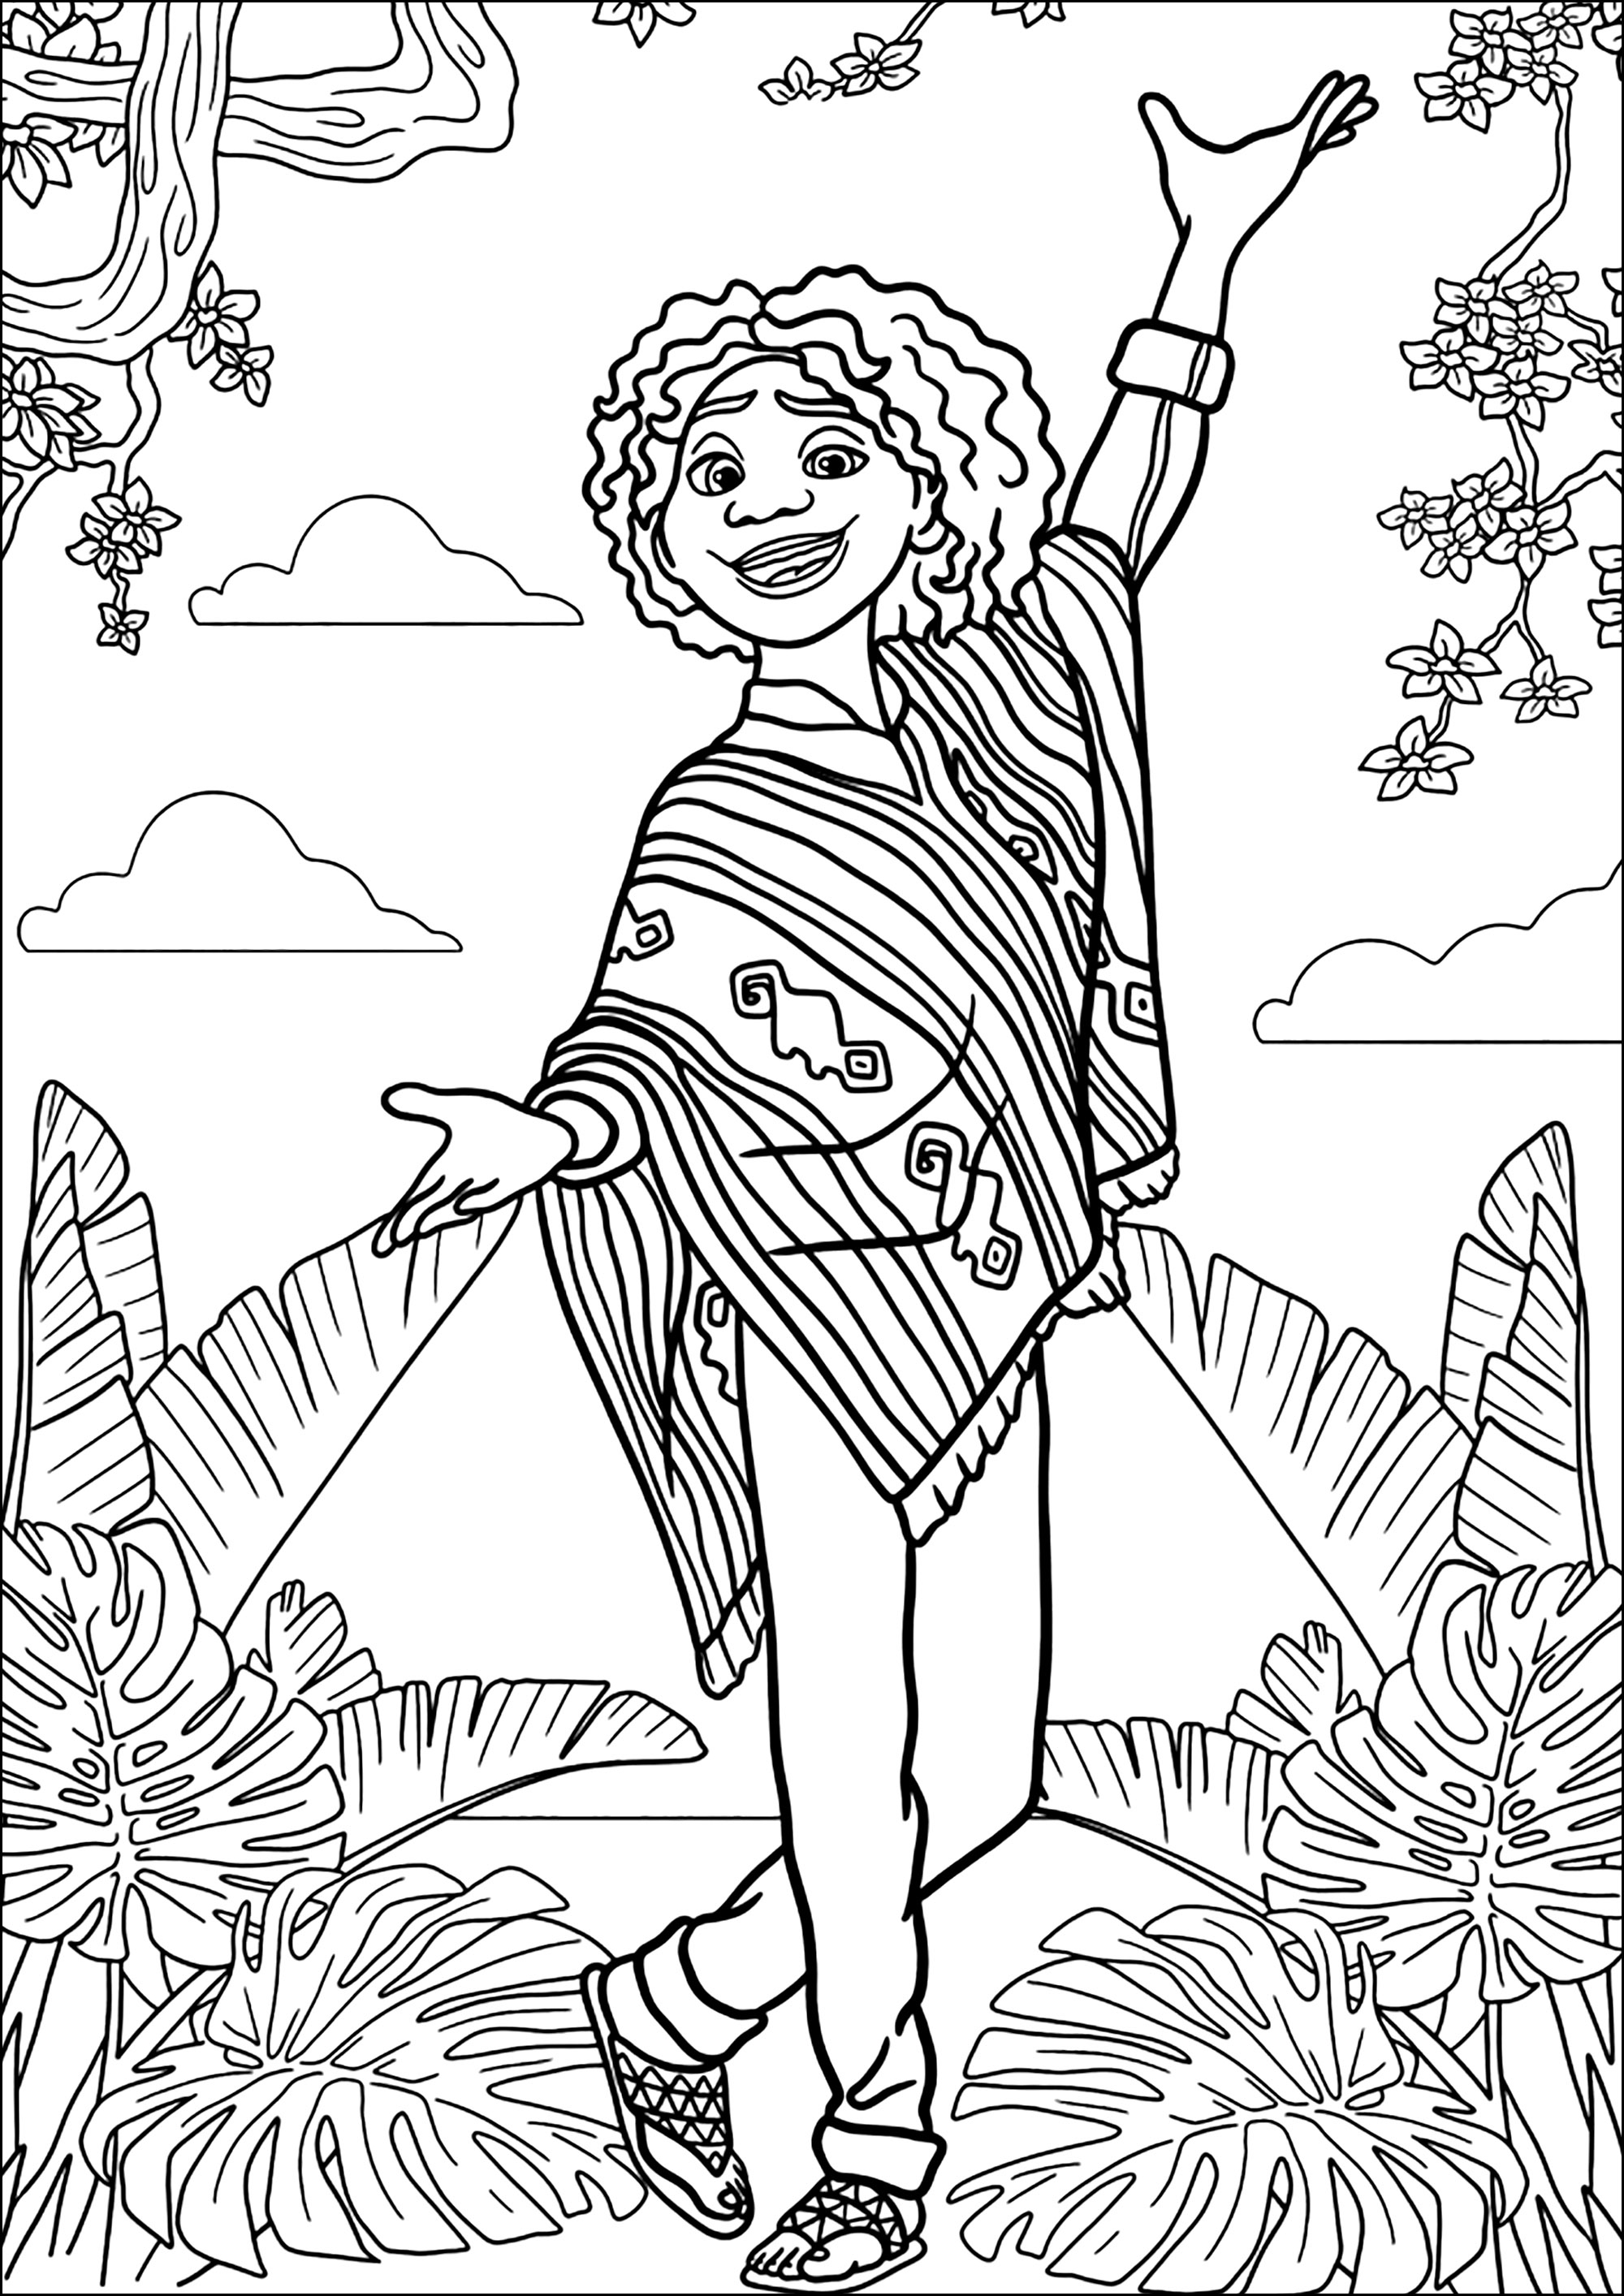 Encanto coloring page mirabel madrigal in the colombian jungle